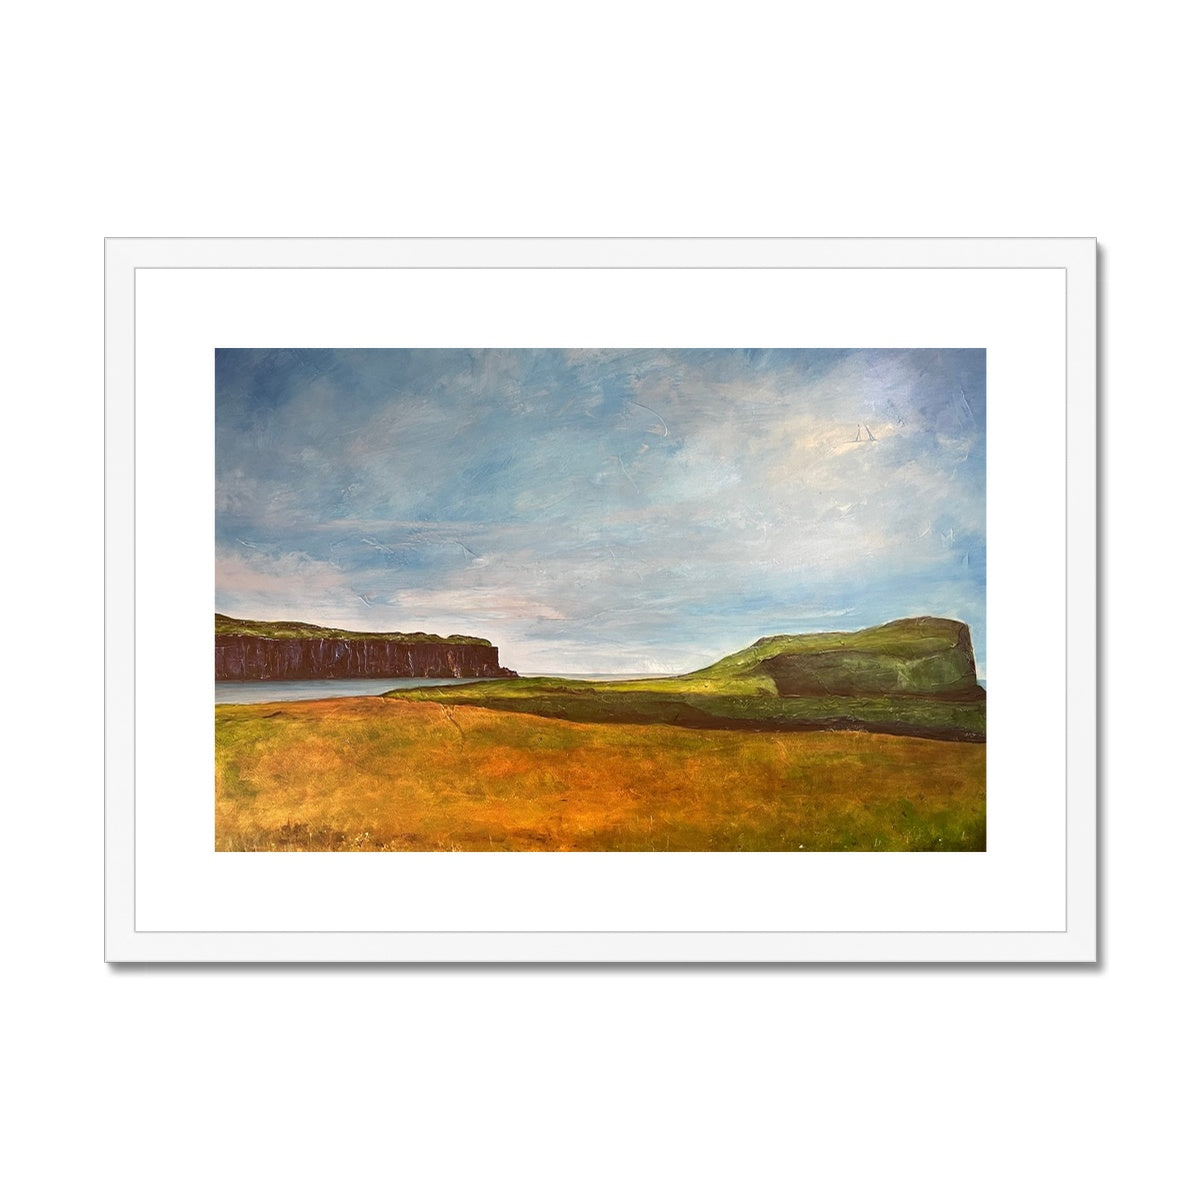 Approaching Oronsay Skye Painting | Framed & Mounted Prints From Scotland-Framed & Mounted Prints-Skye Art Gallery-A2 Landscape-White Frame-Paintings, Prints, Homeware, Art Gifts From Scotland By Scottish Artist Kevin Hunter